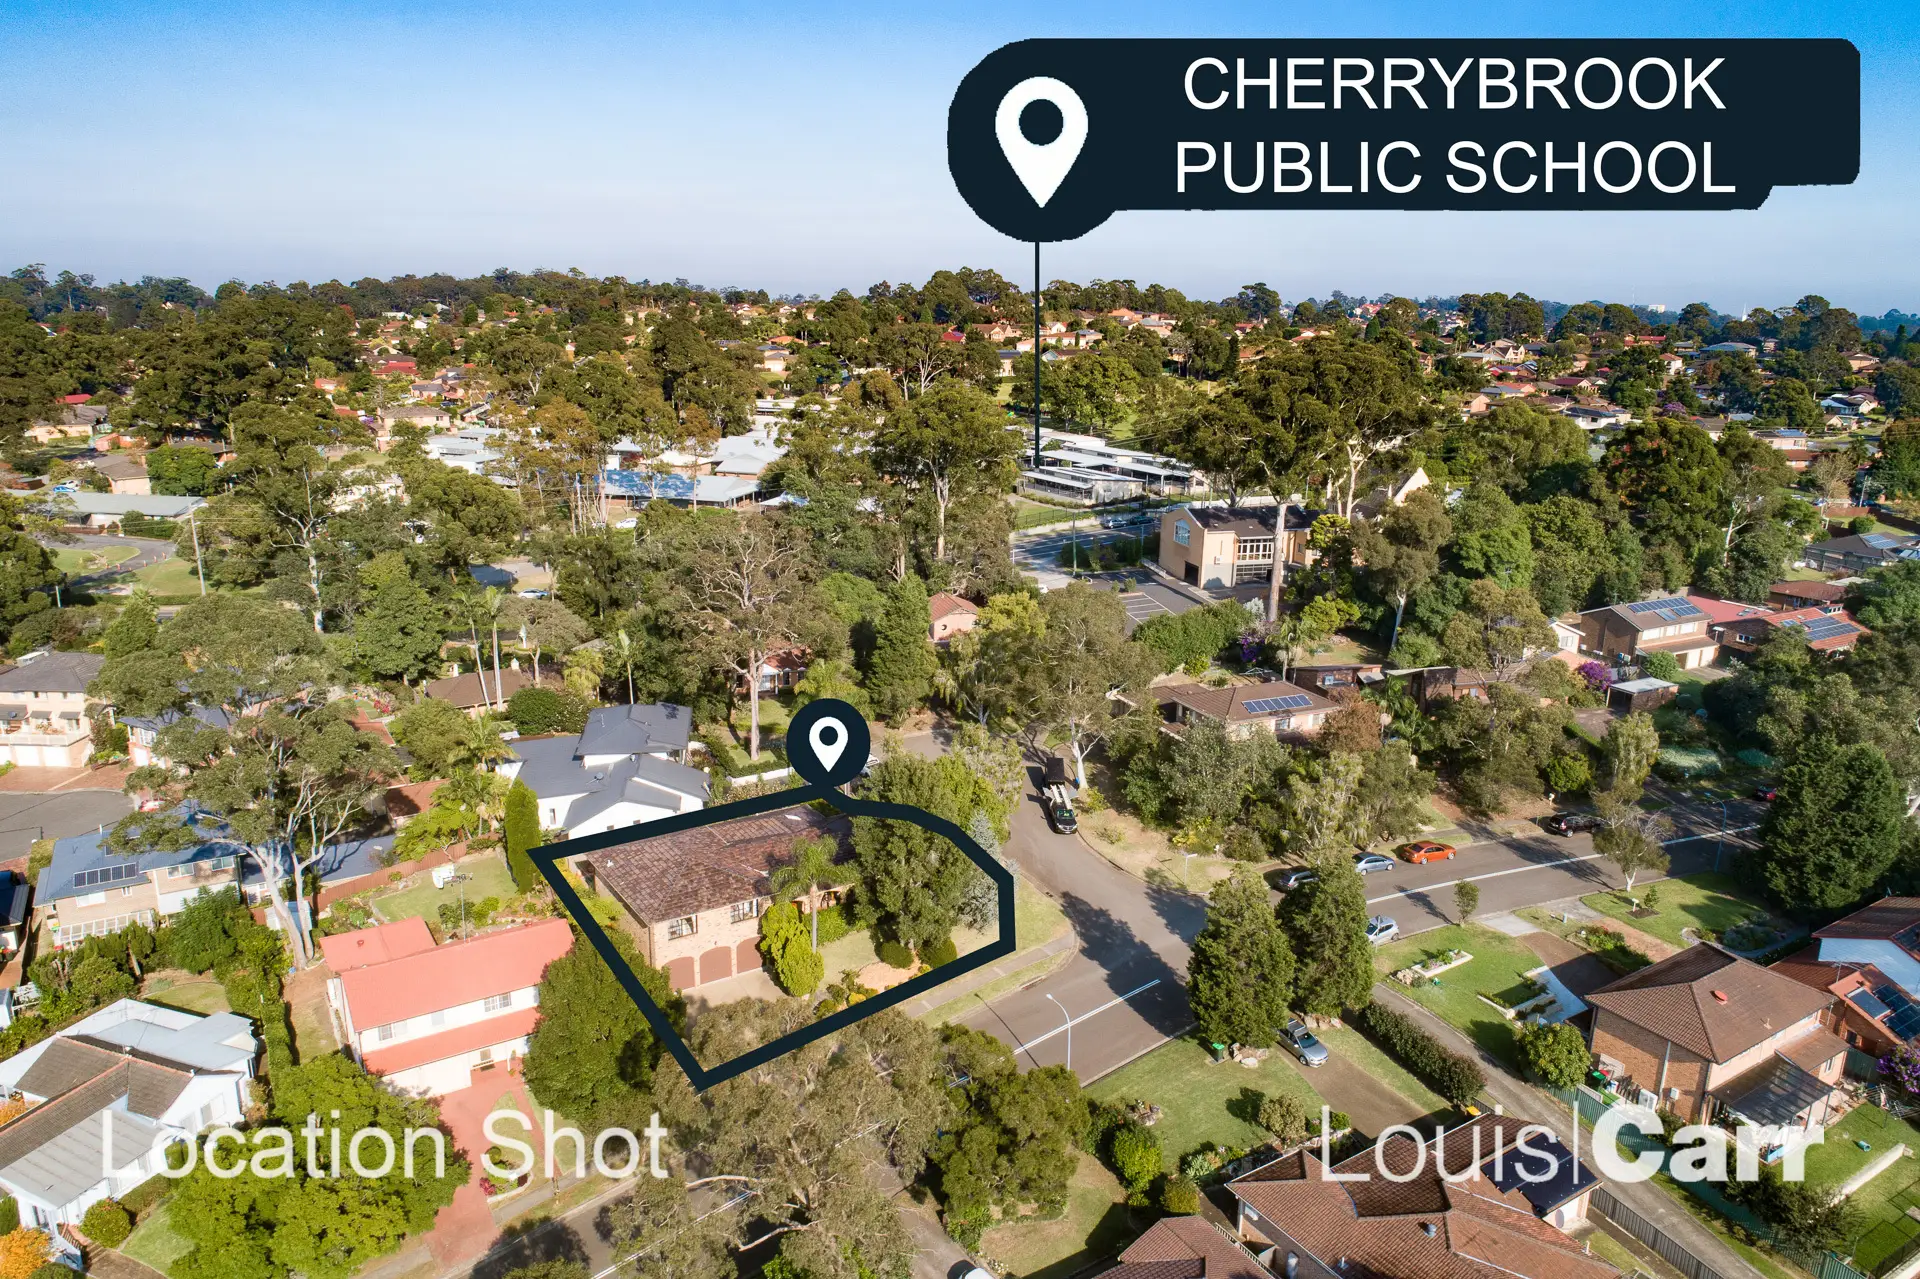 Photo #13: 33 Casuarina Drive, Cherrybrook - Sold by Louis Carr Real Estate